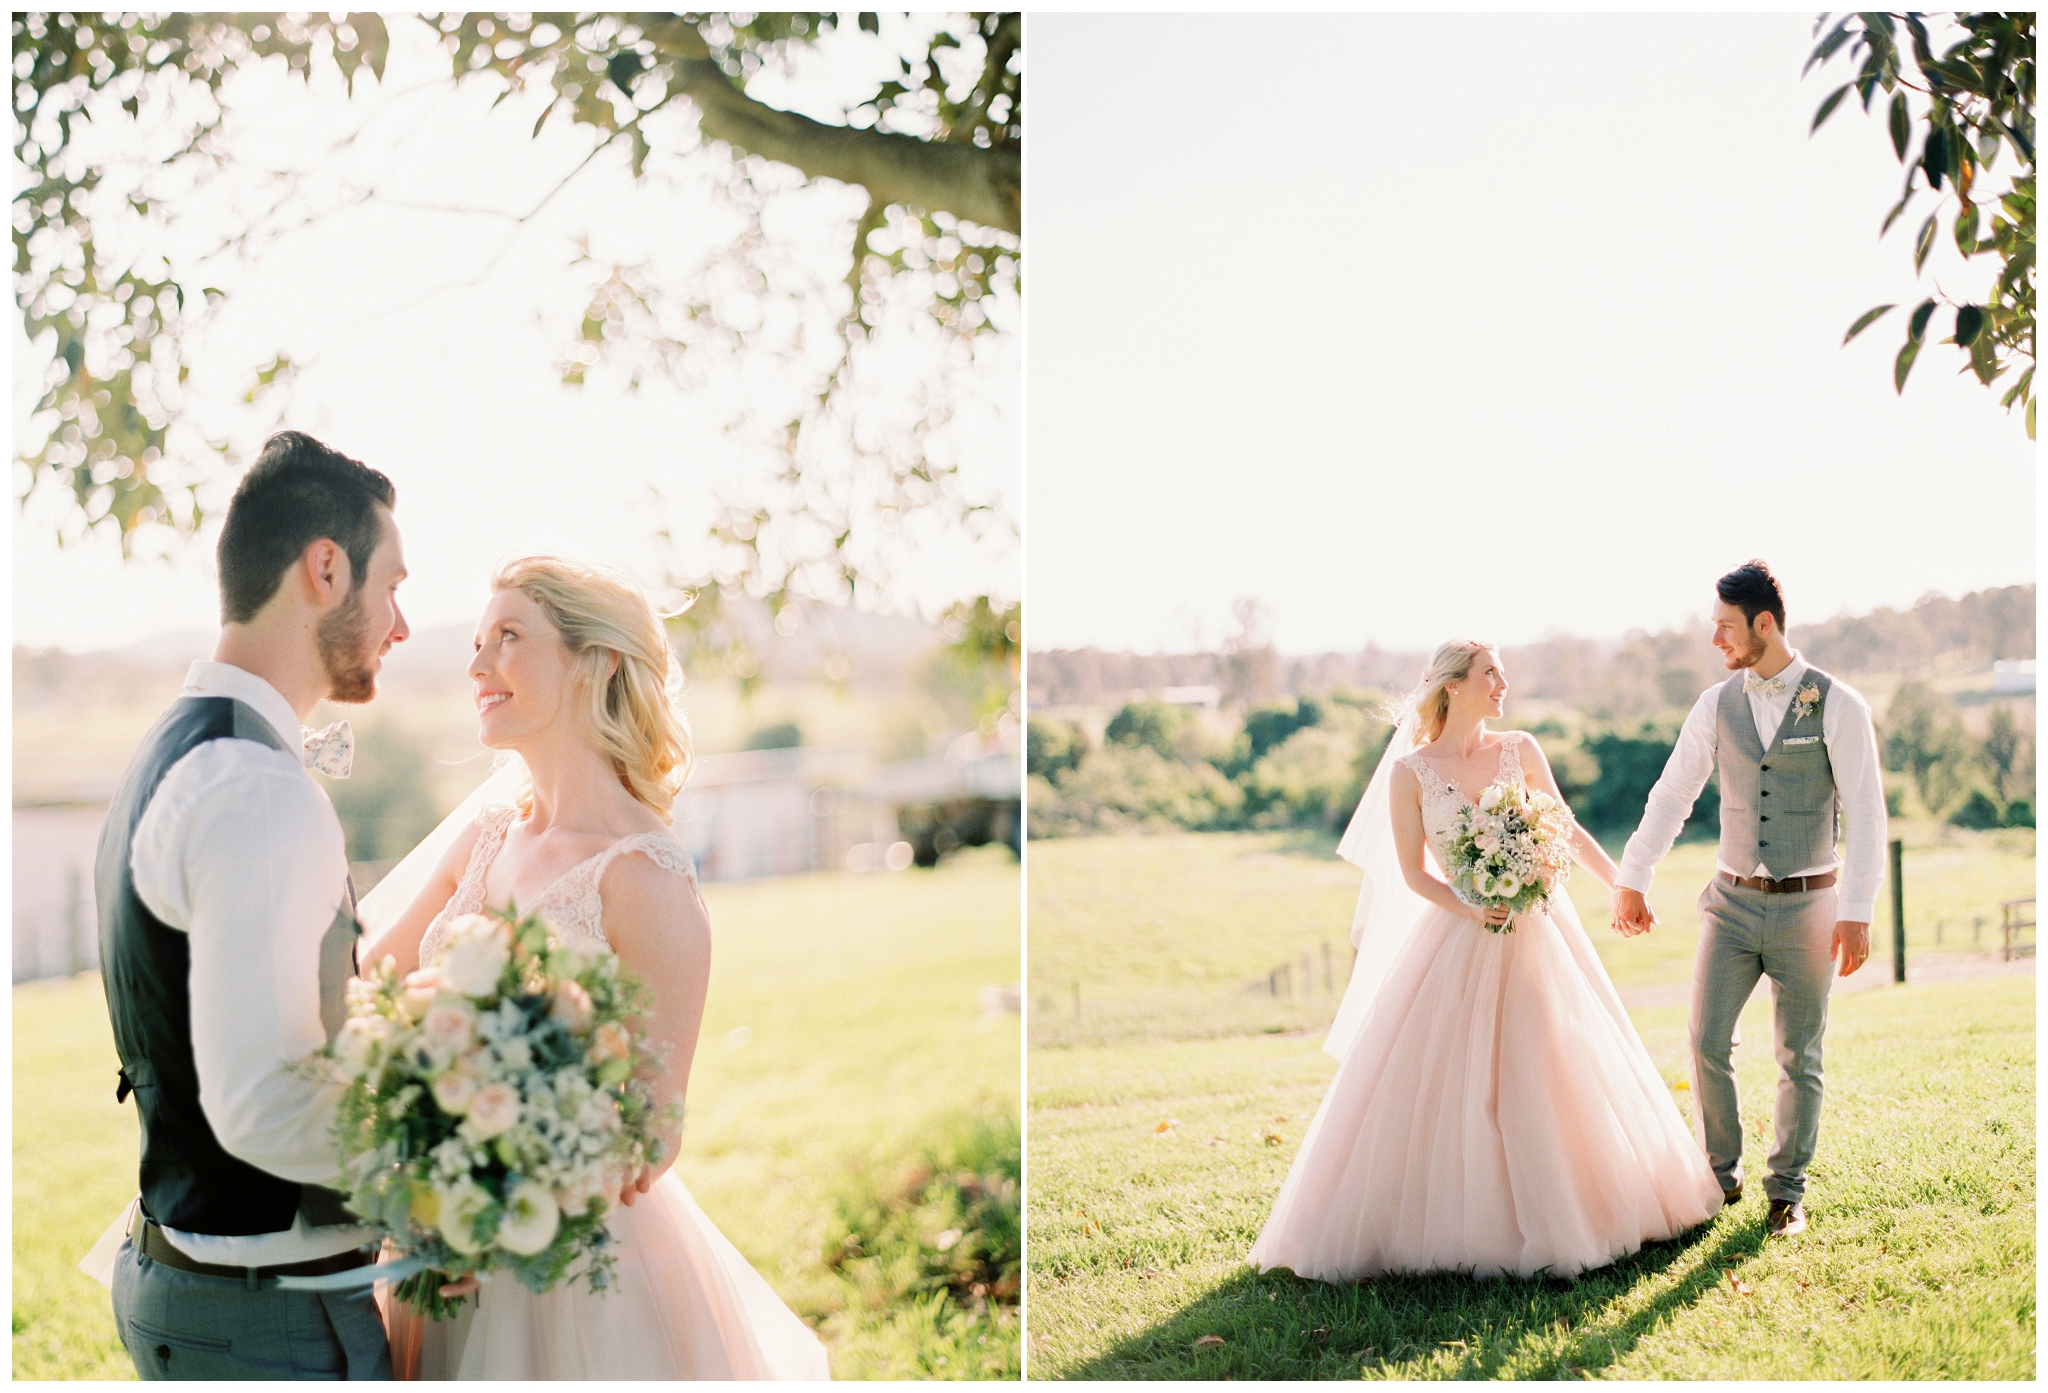 Tegan and Alex Wedding at Albert River Wines by Casey Jane Photography 45